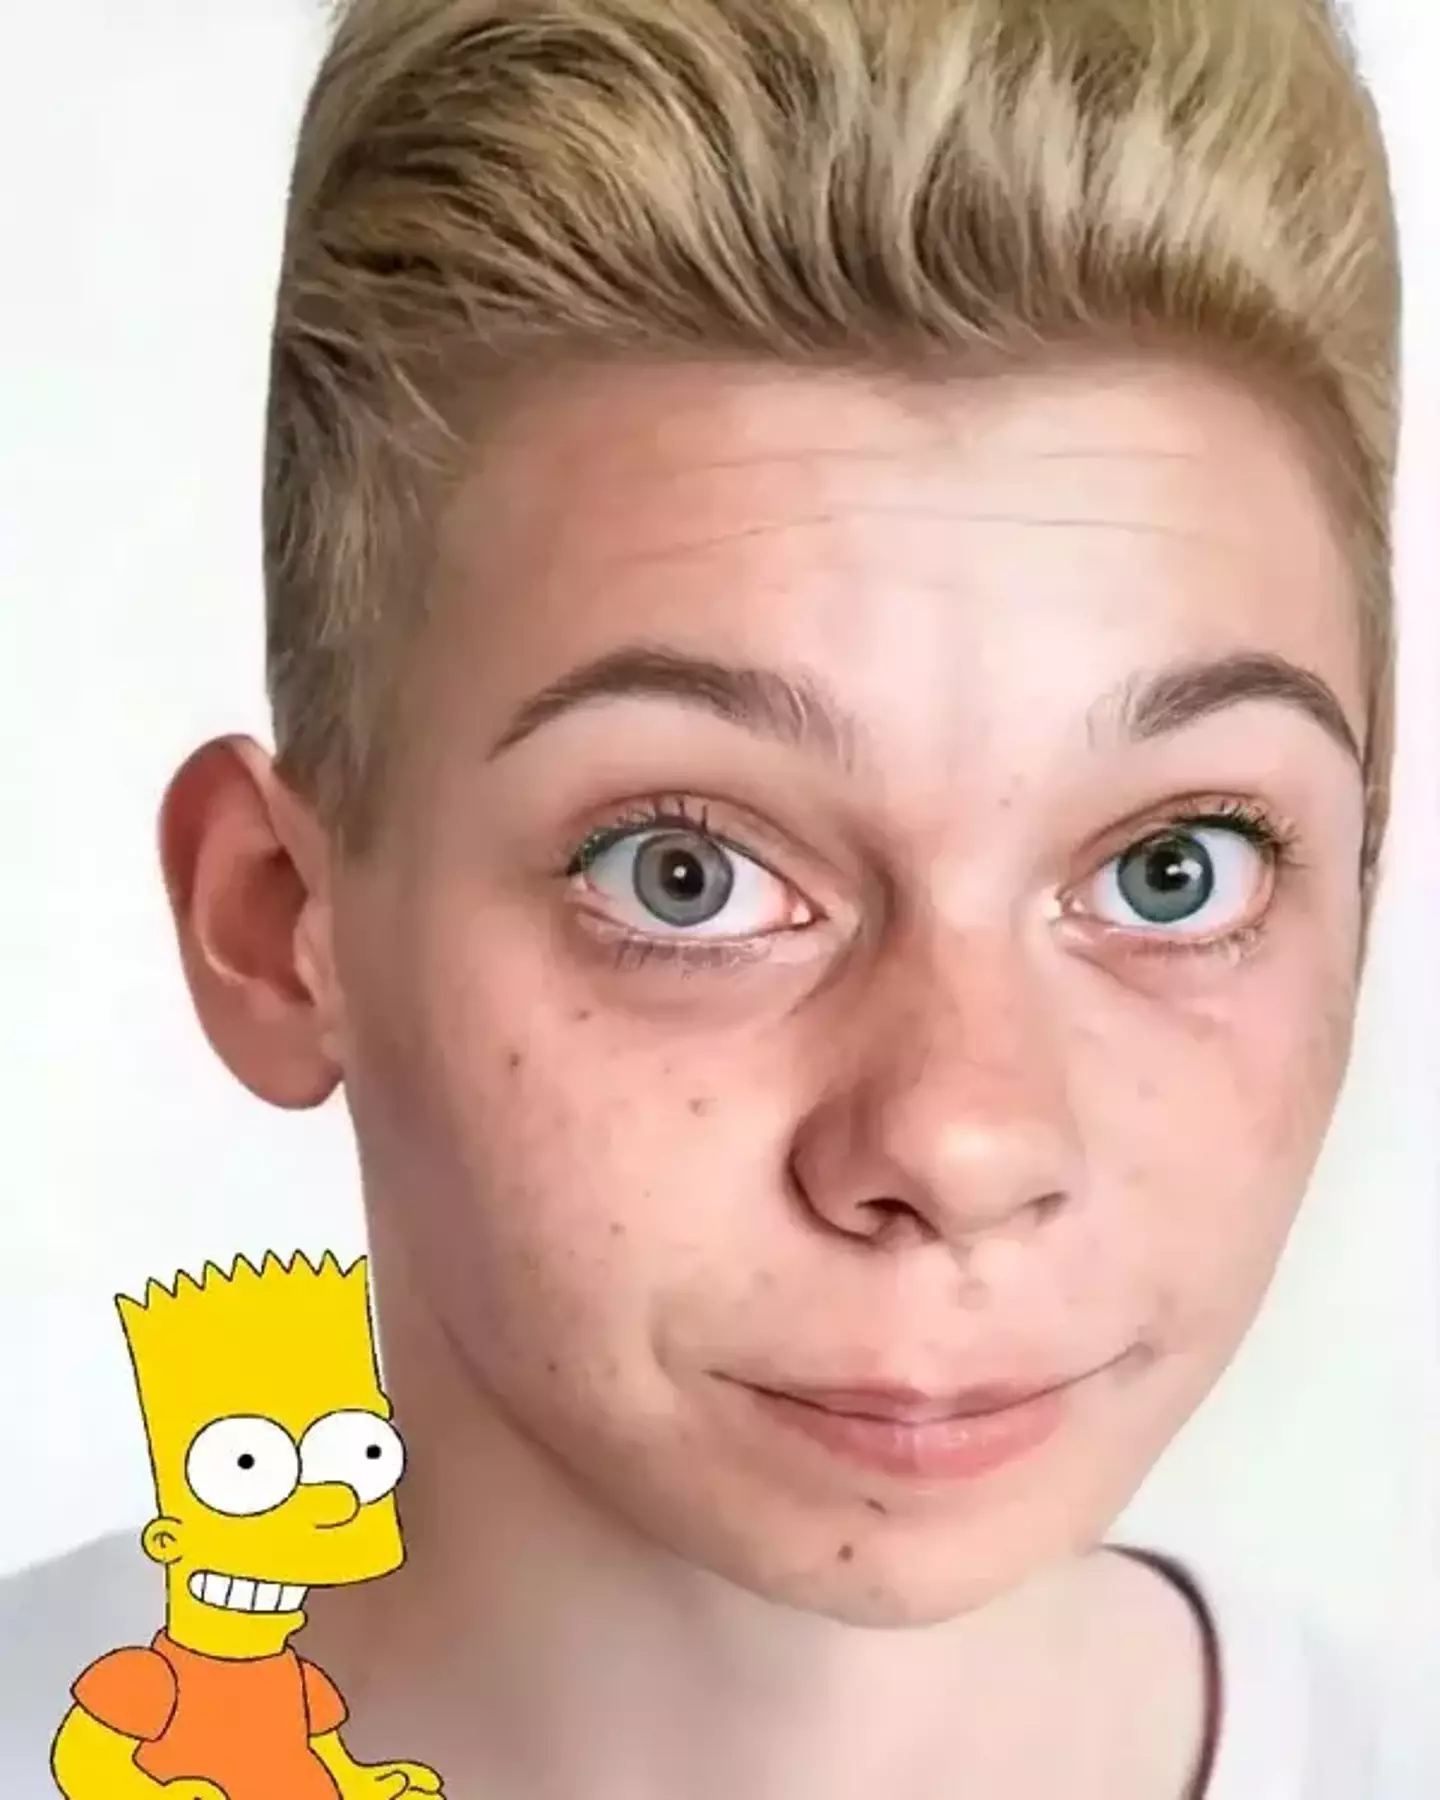 This is how Bart Simpson would look if he were real, apparently. (Instagram/@hidreley)